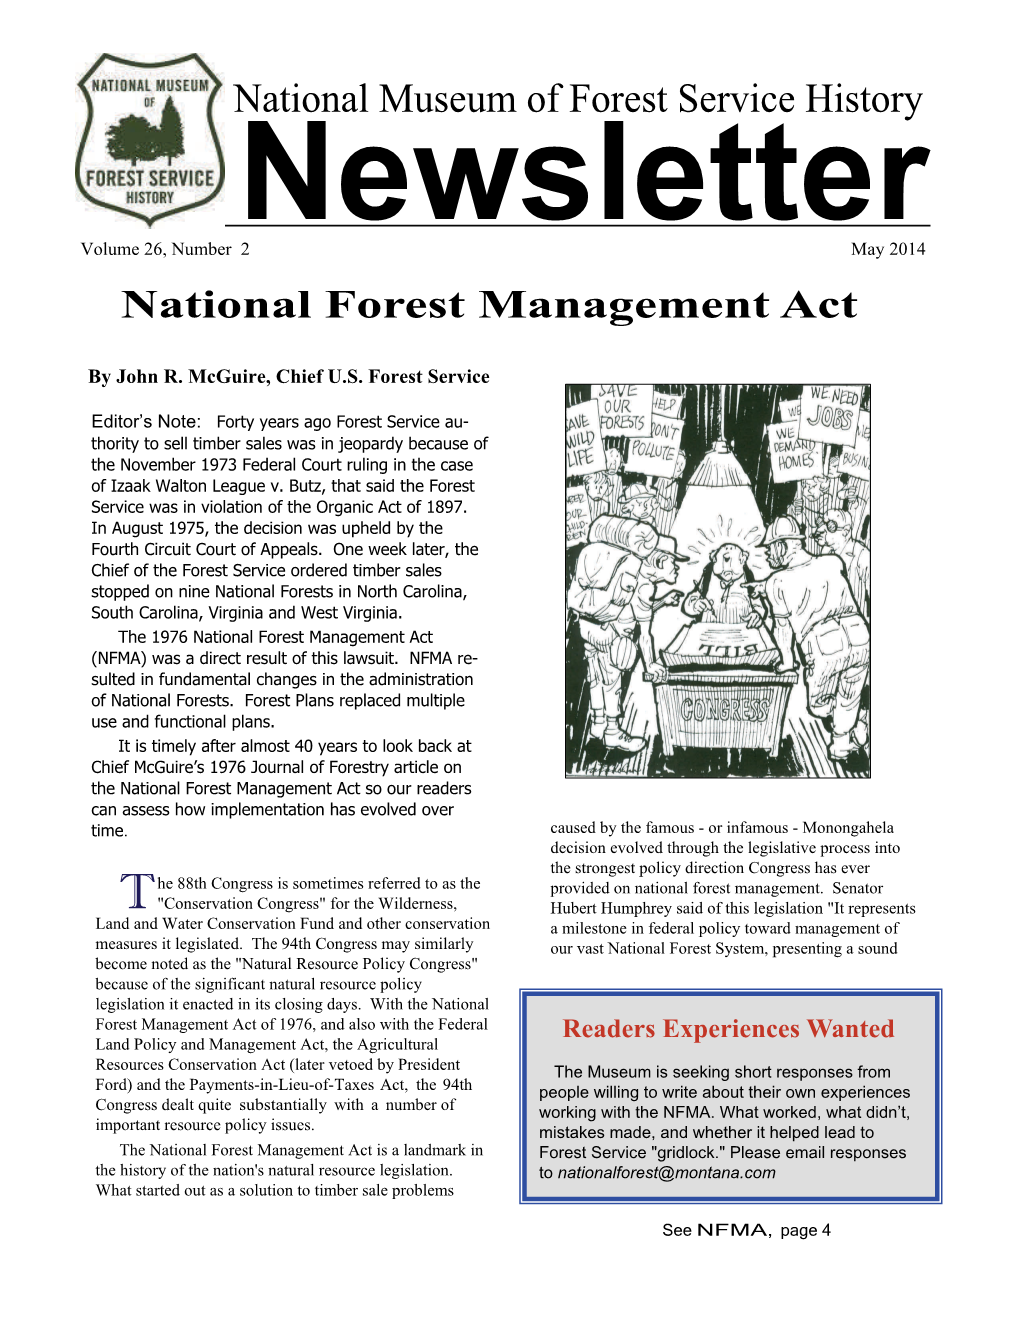 National Forest Management Act